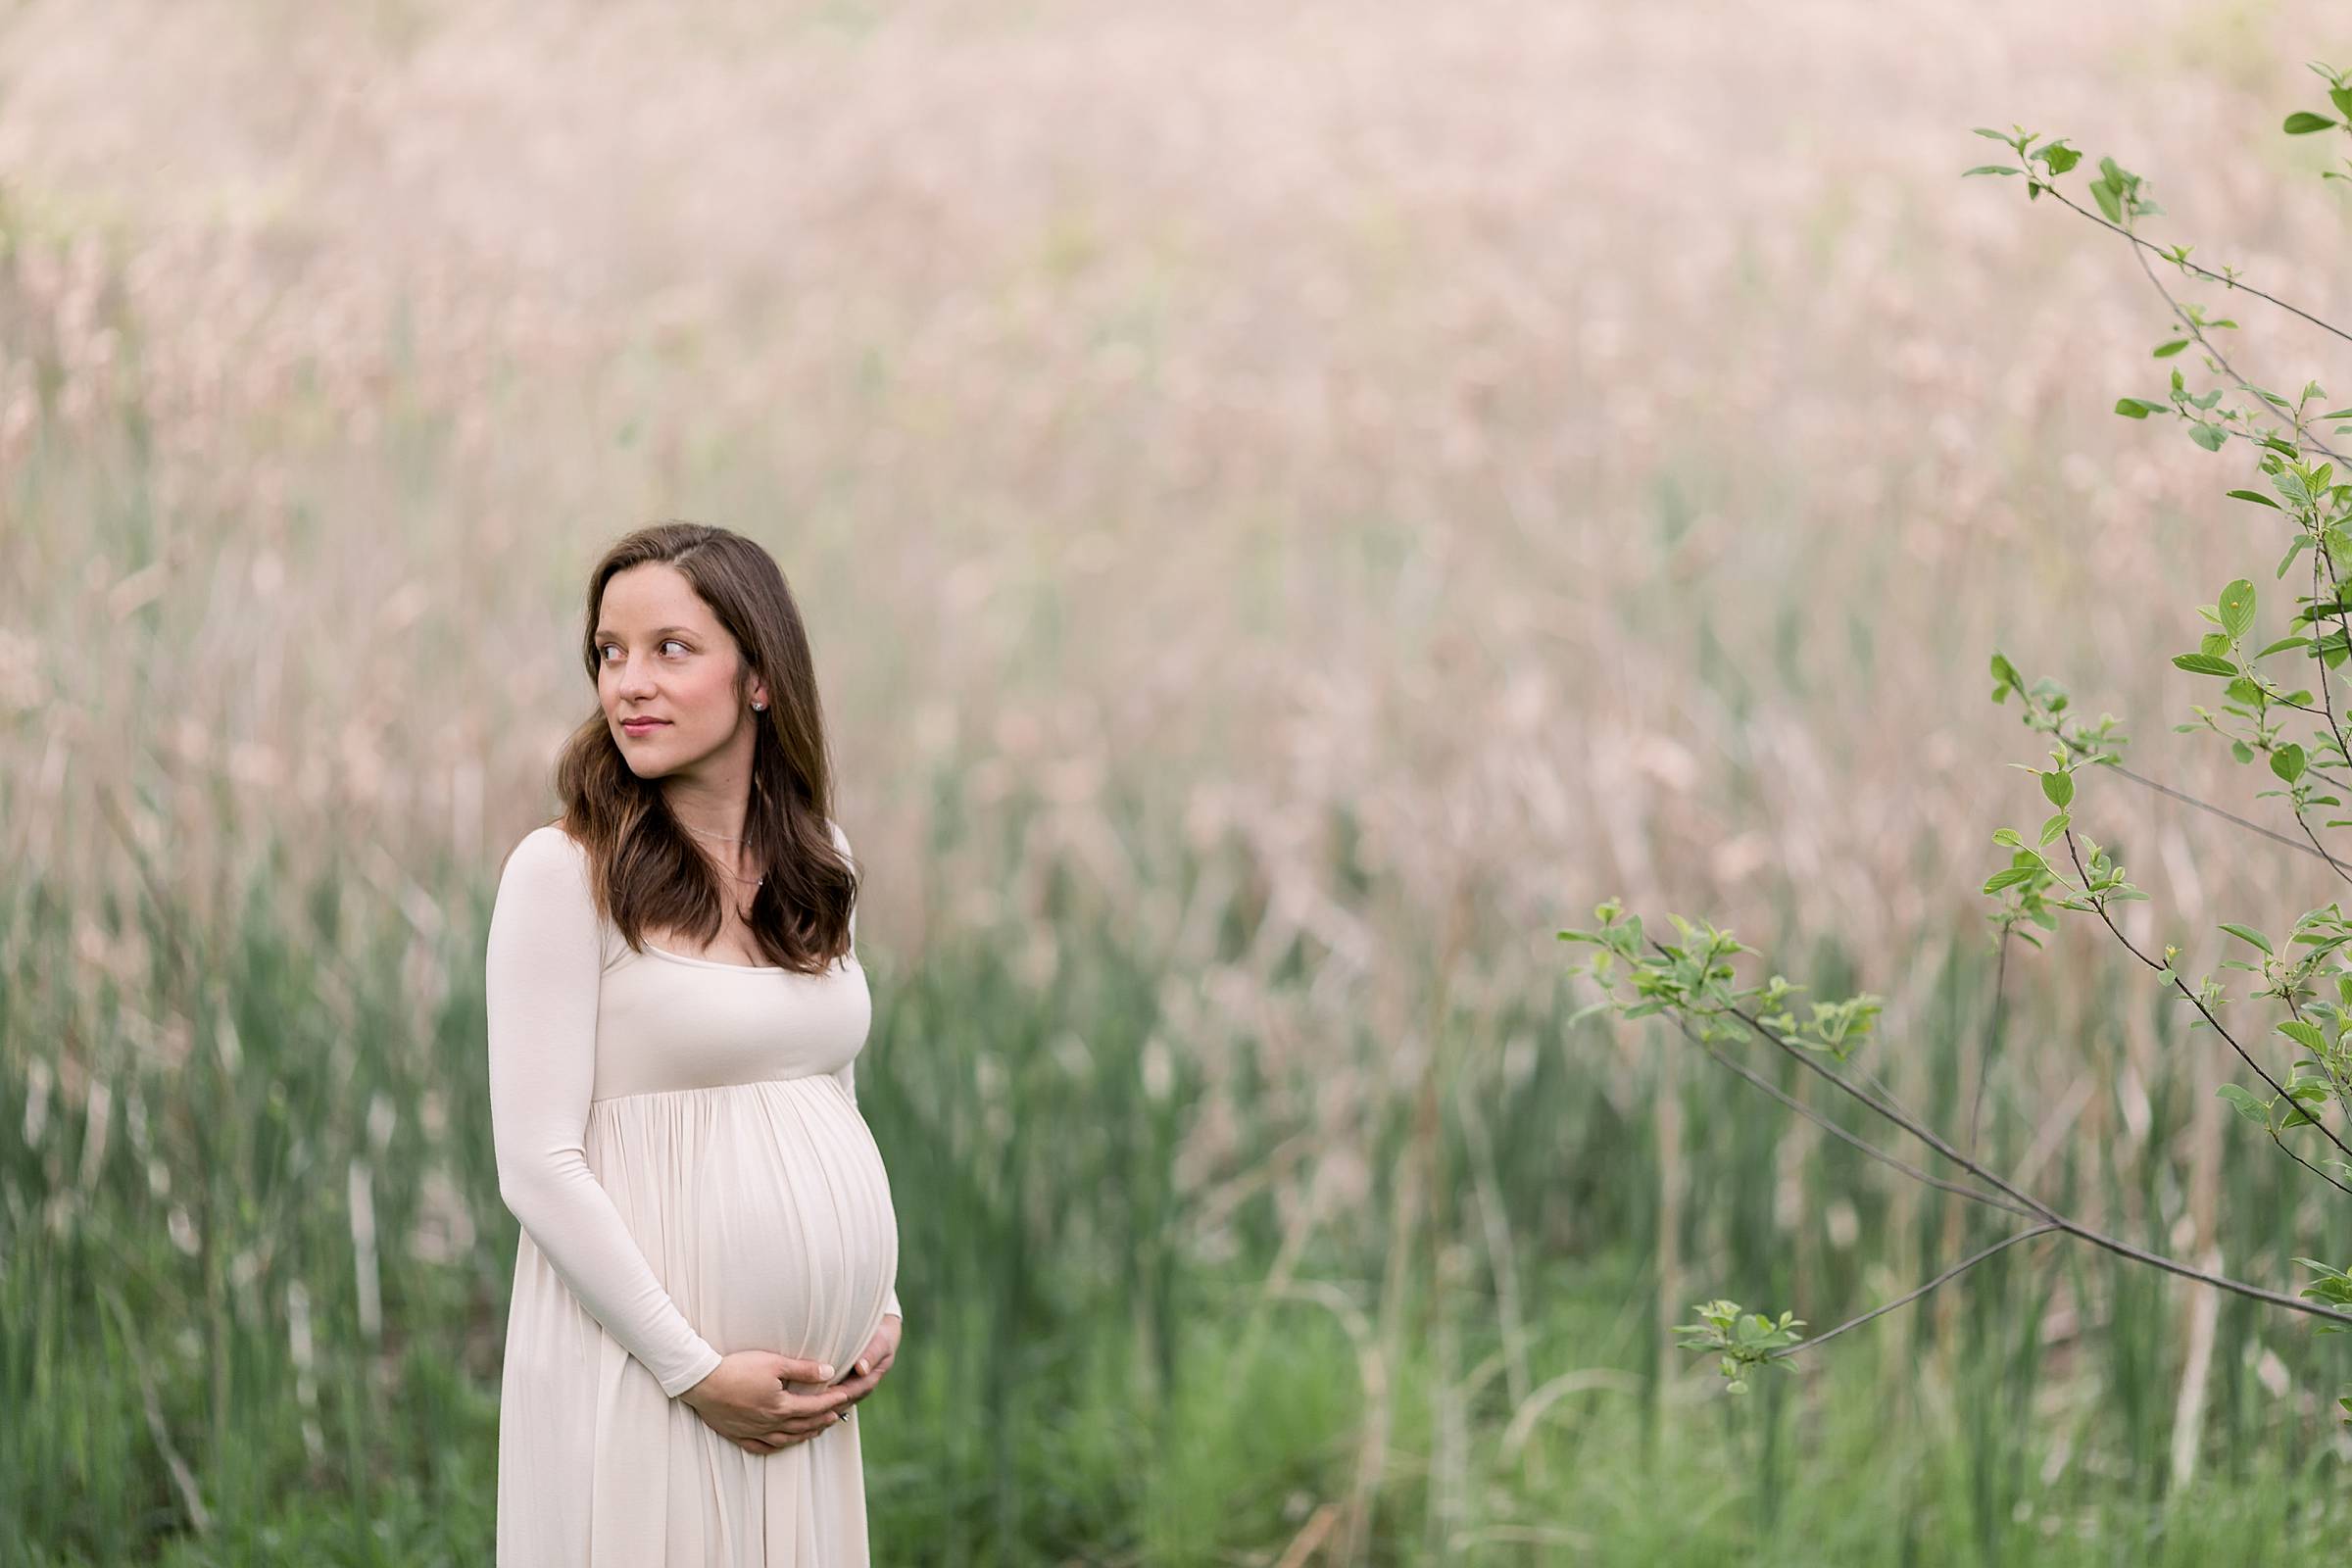 Pregnant woman in a field of tall grasses